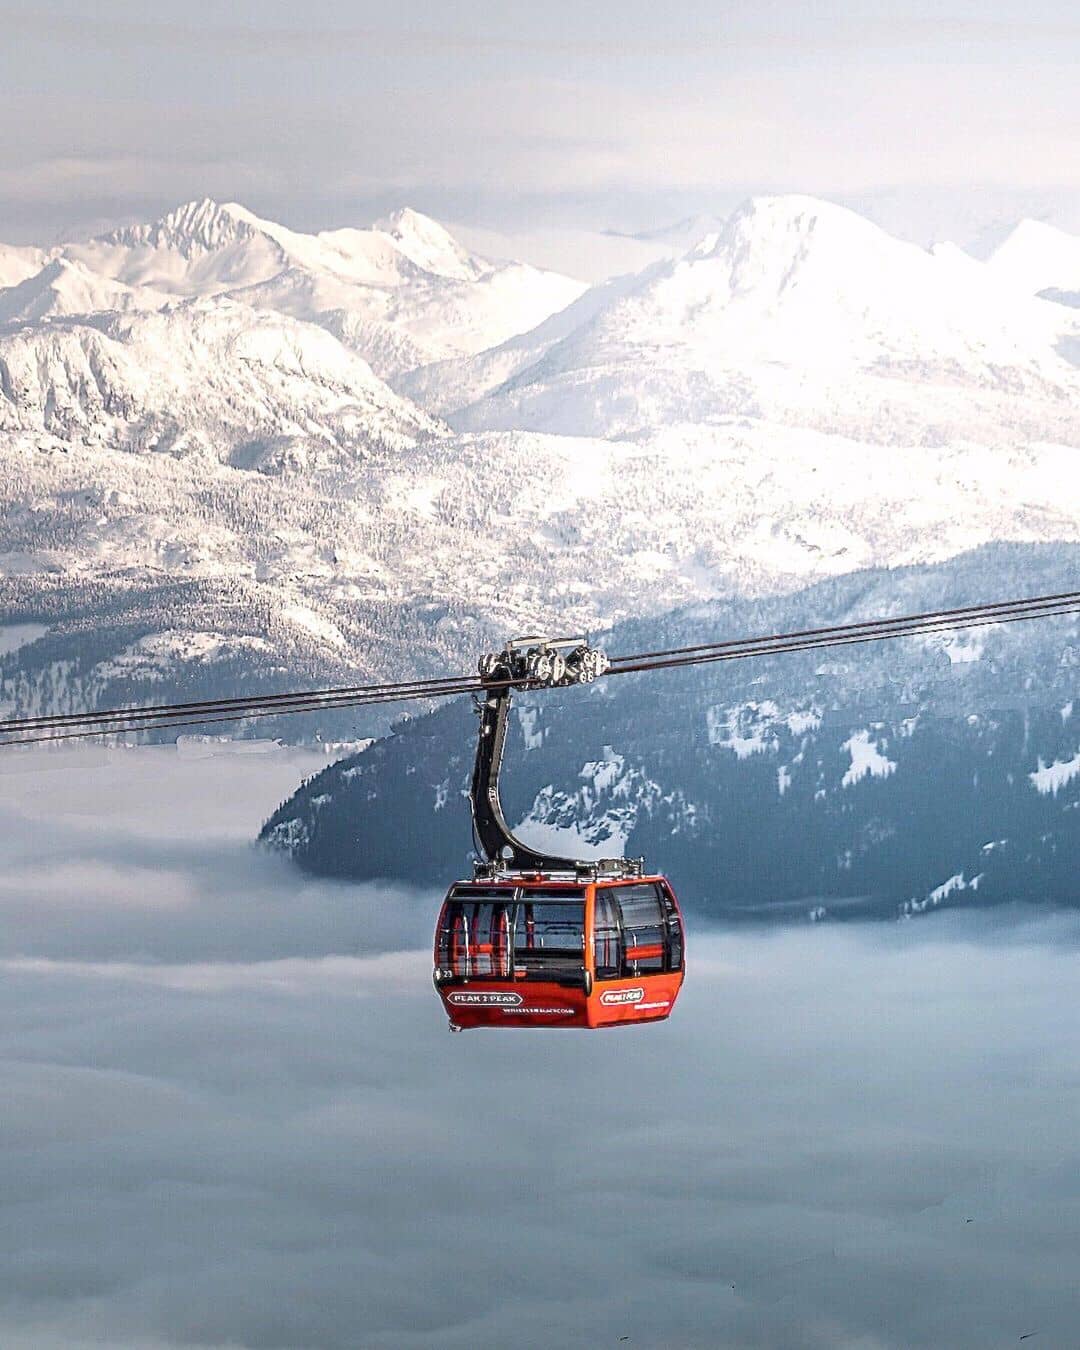 vancouver to whistler - peak 2 peak gondola in air with snowy mountains in background